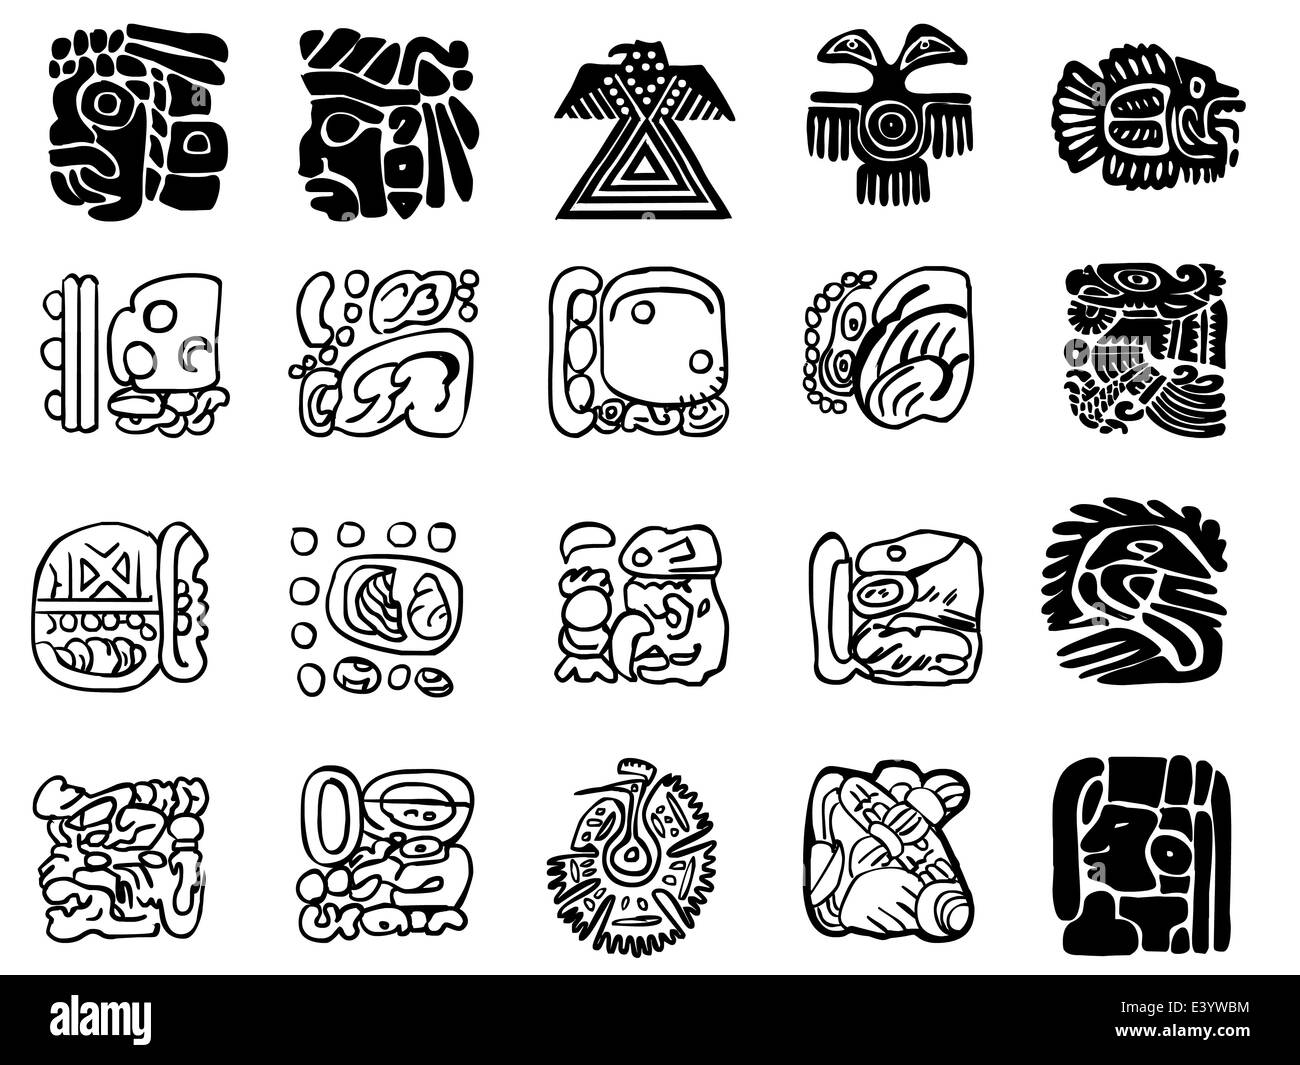 Maya patterns made on the basis of reliefs and sculptures. Human faces, birds, fish and animals. Elements of floral ornament. Stock Photo